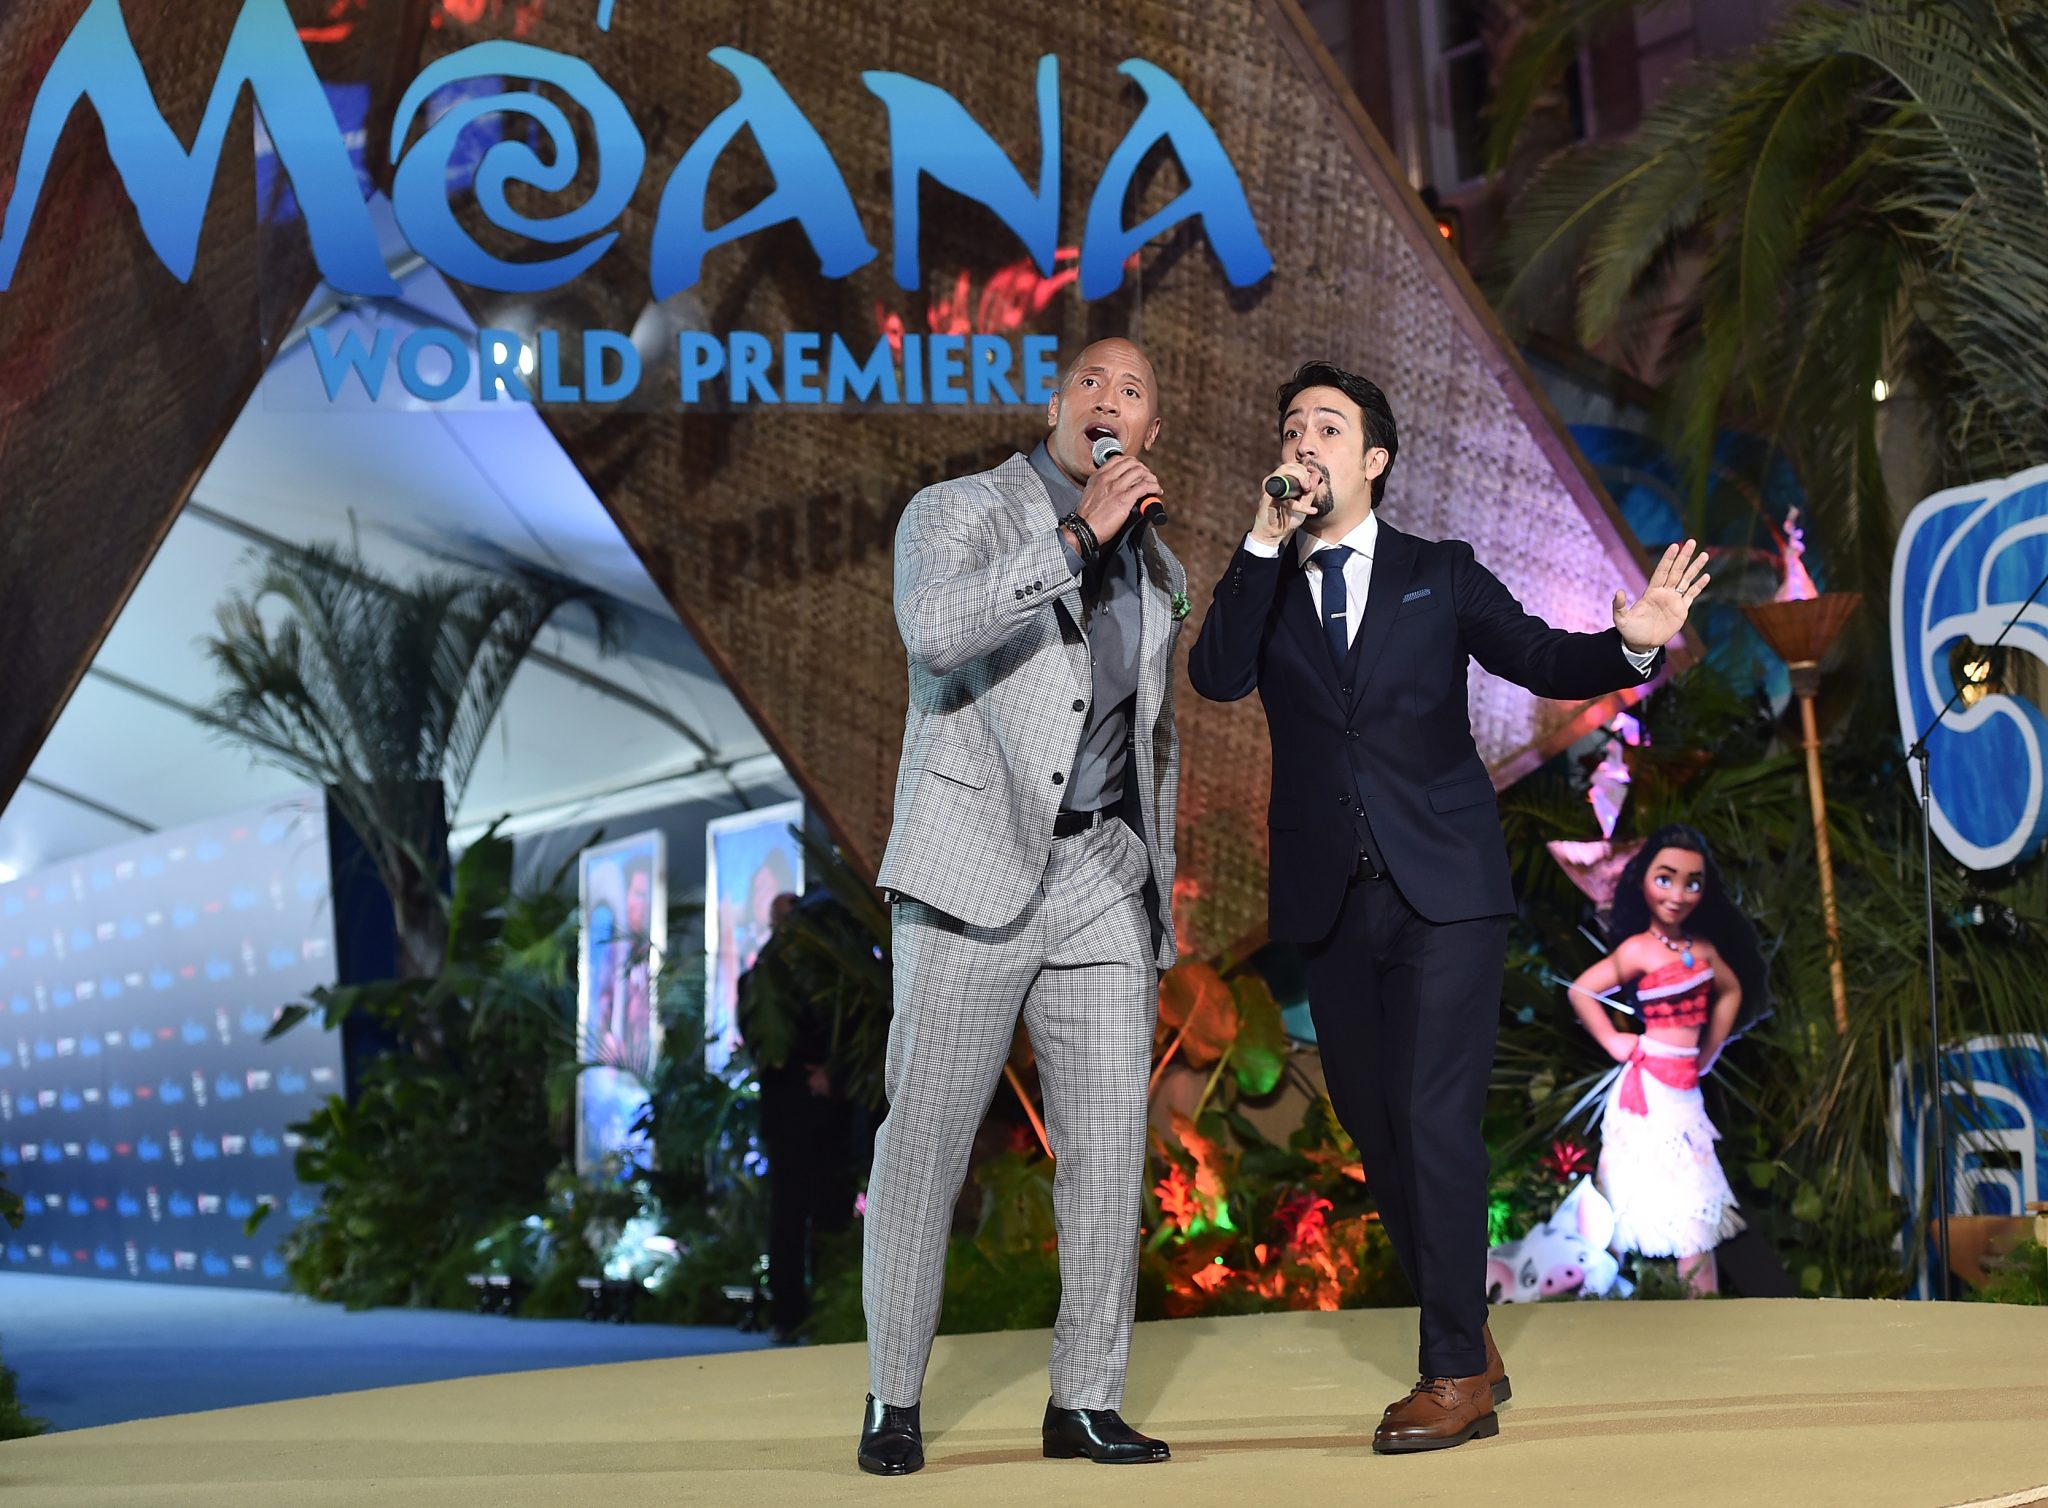 A Pictorial Look at the Moana World Premiere